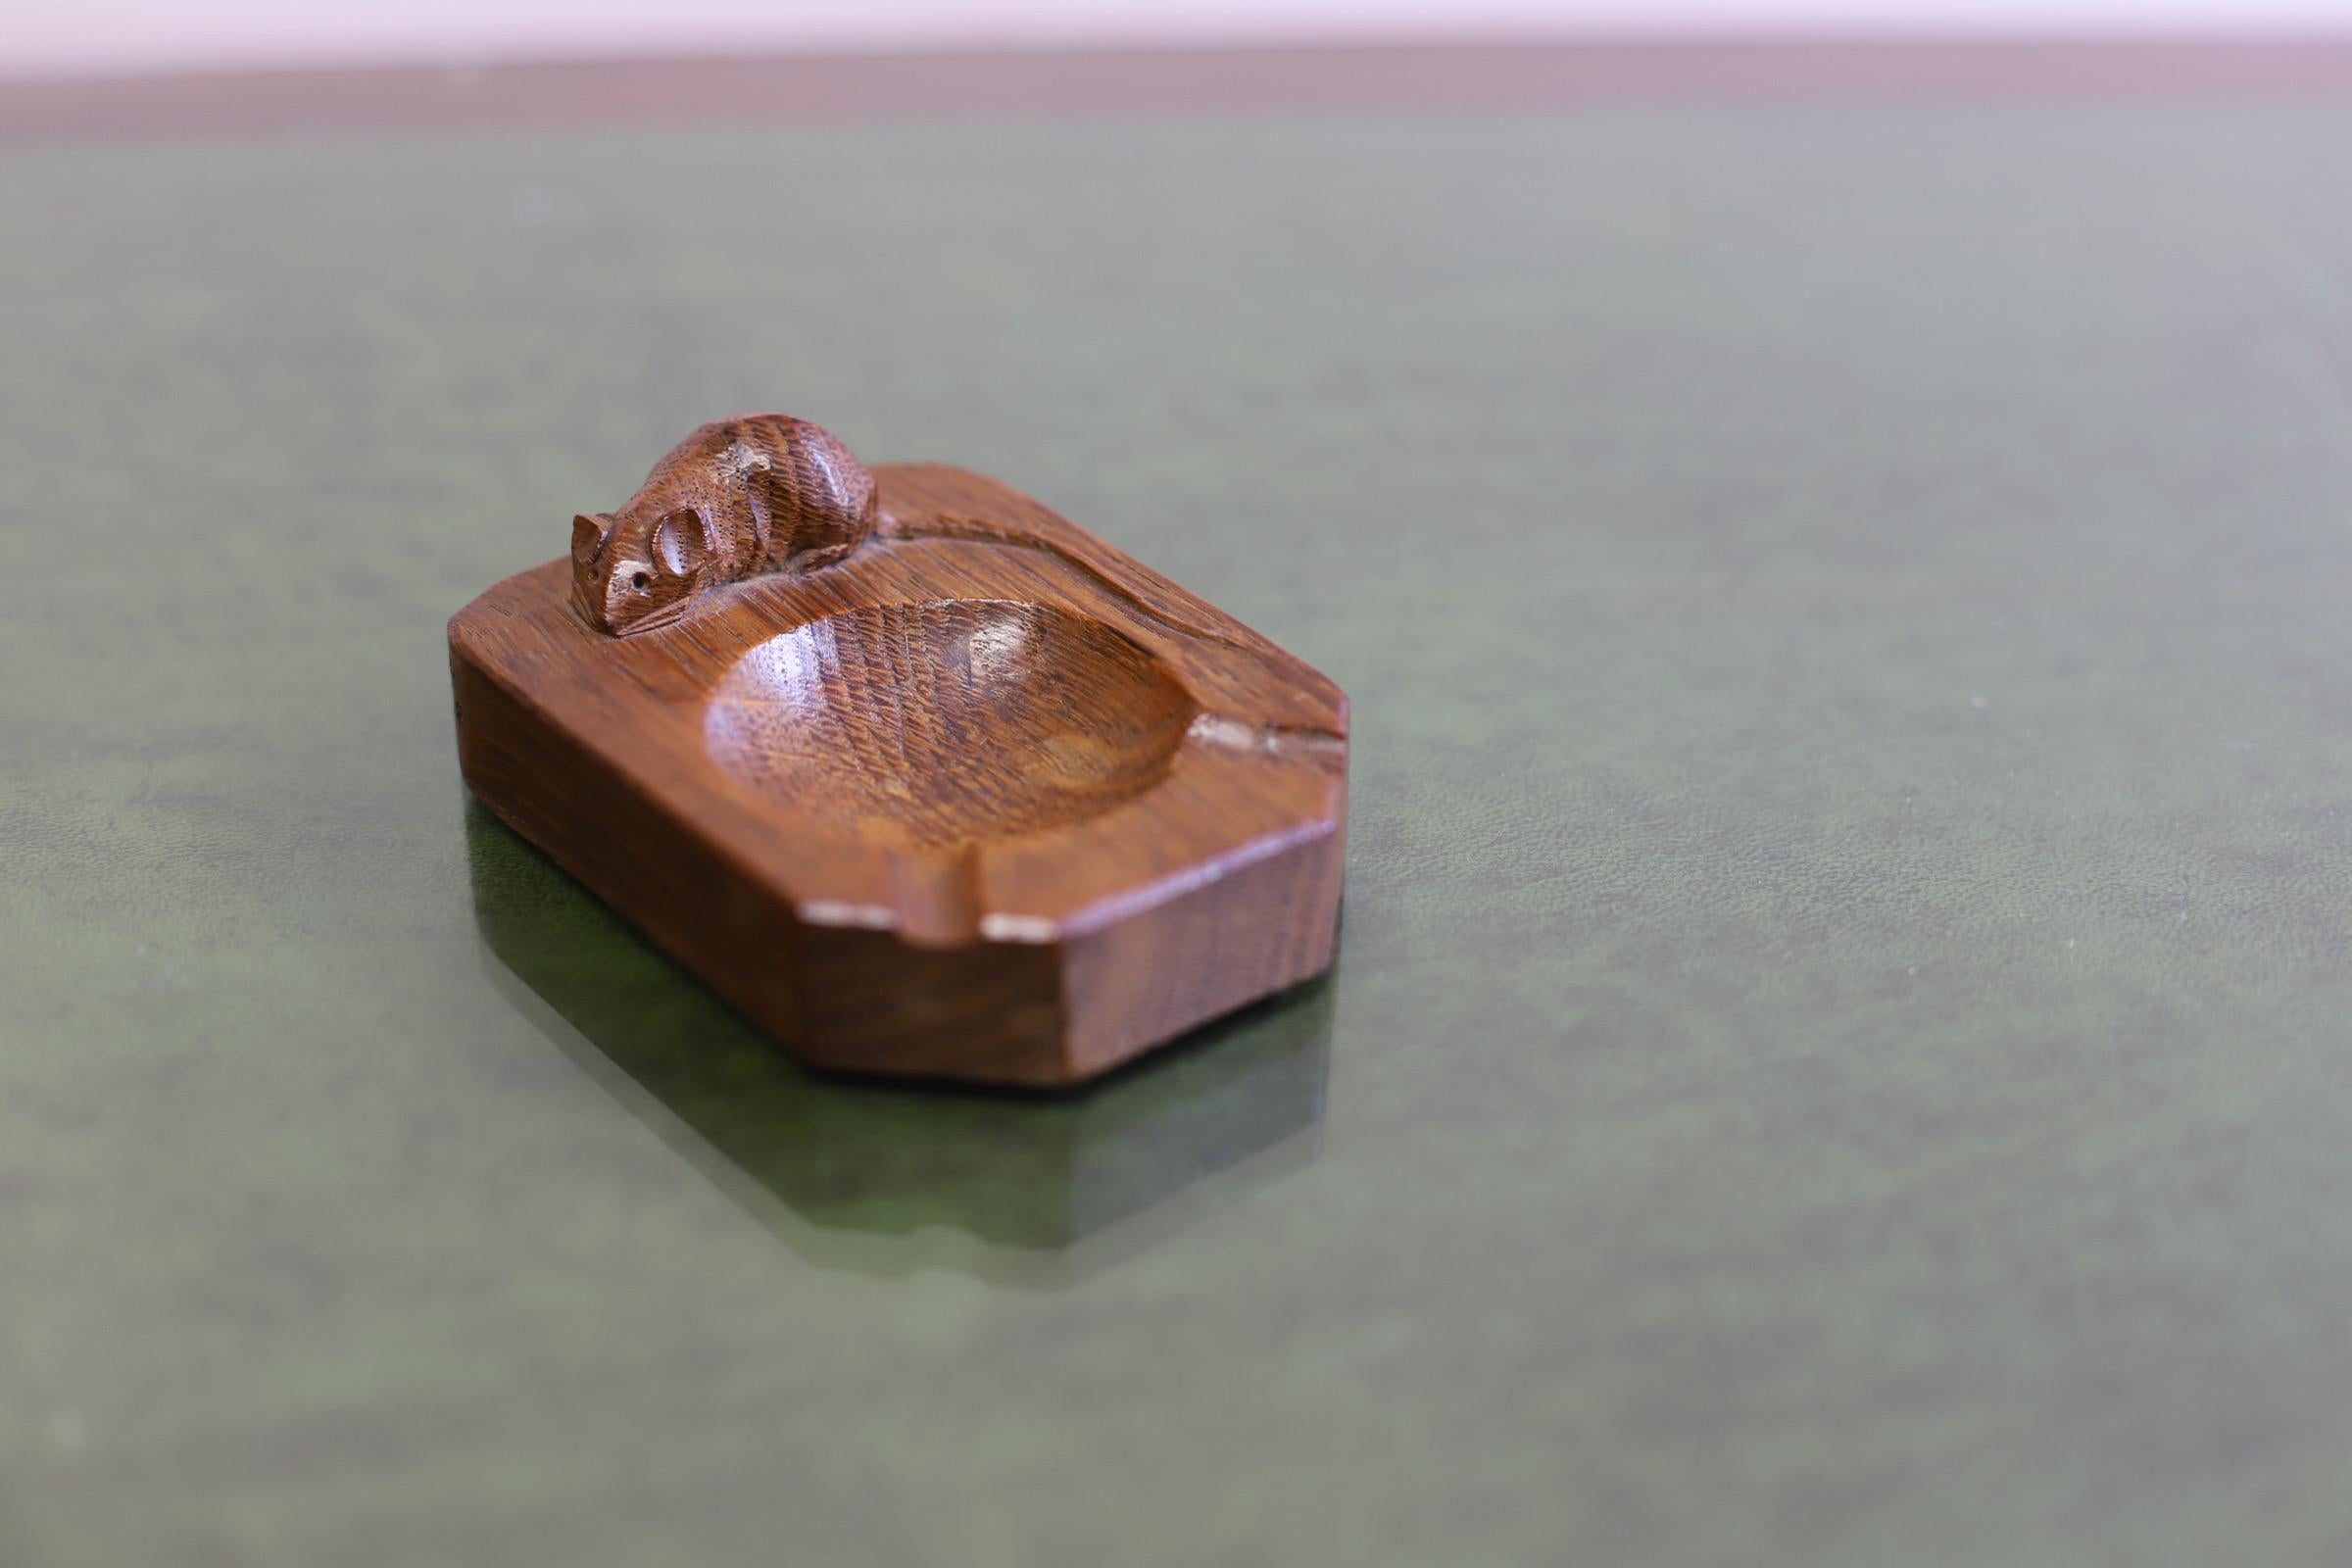 
Robert ' Mouseman ' Thompson, carved oak ashtray with mouse signature .
